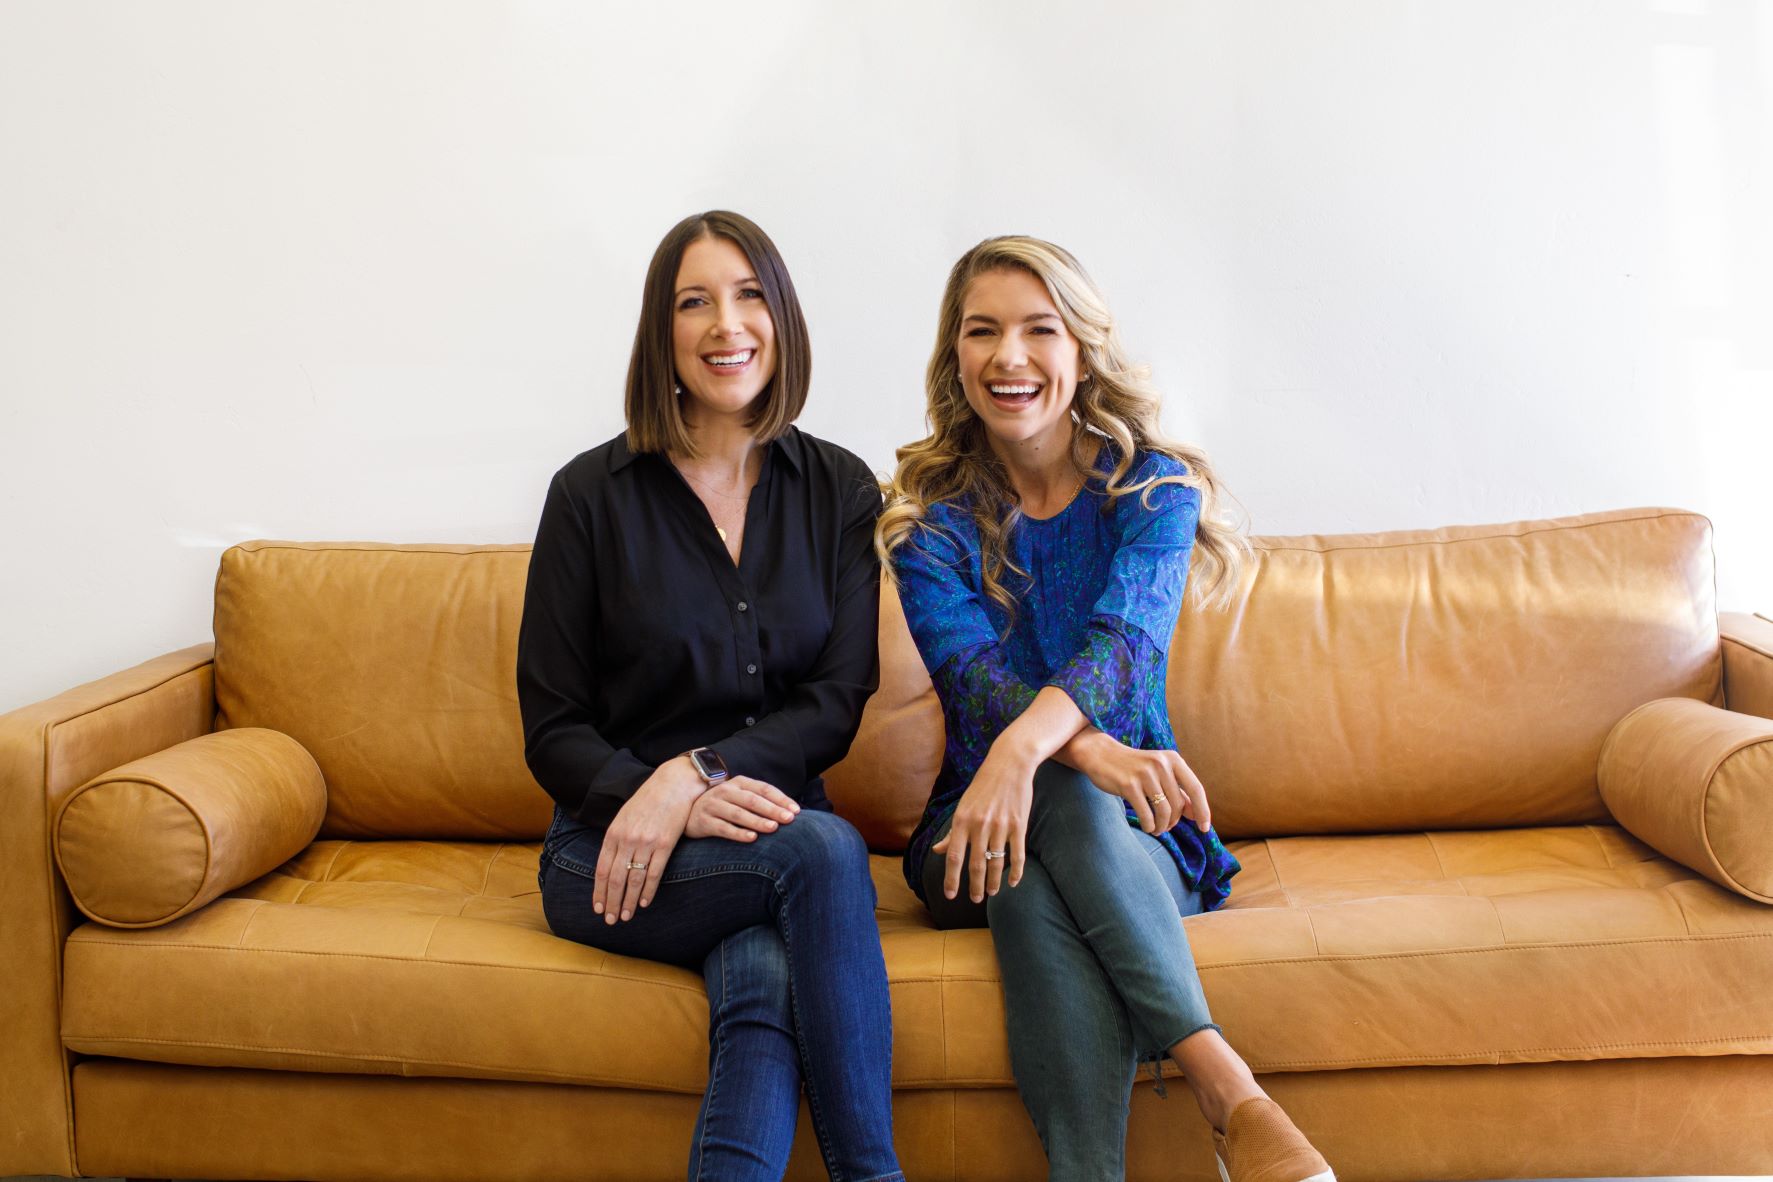 Equip co-founders Kristina Saffran and Erin Parks